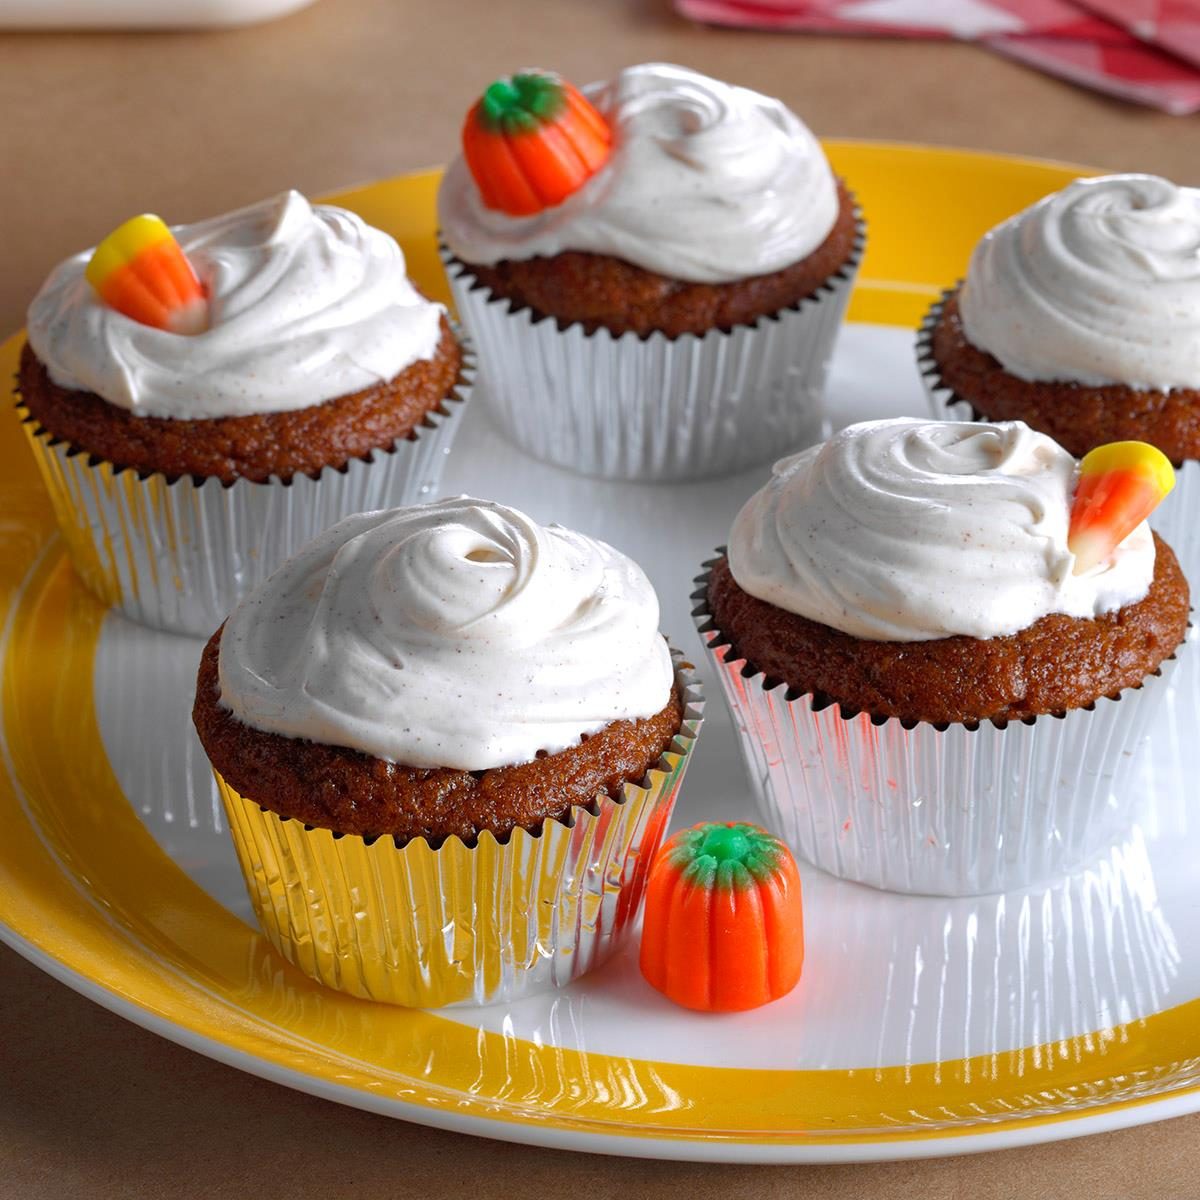 Pumpkin Cupcakes with Spiced Frosting